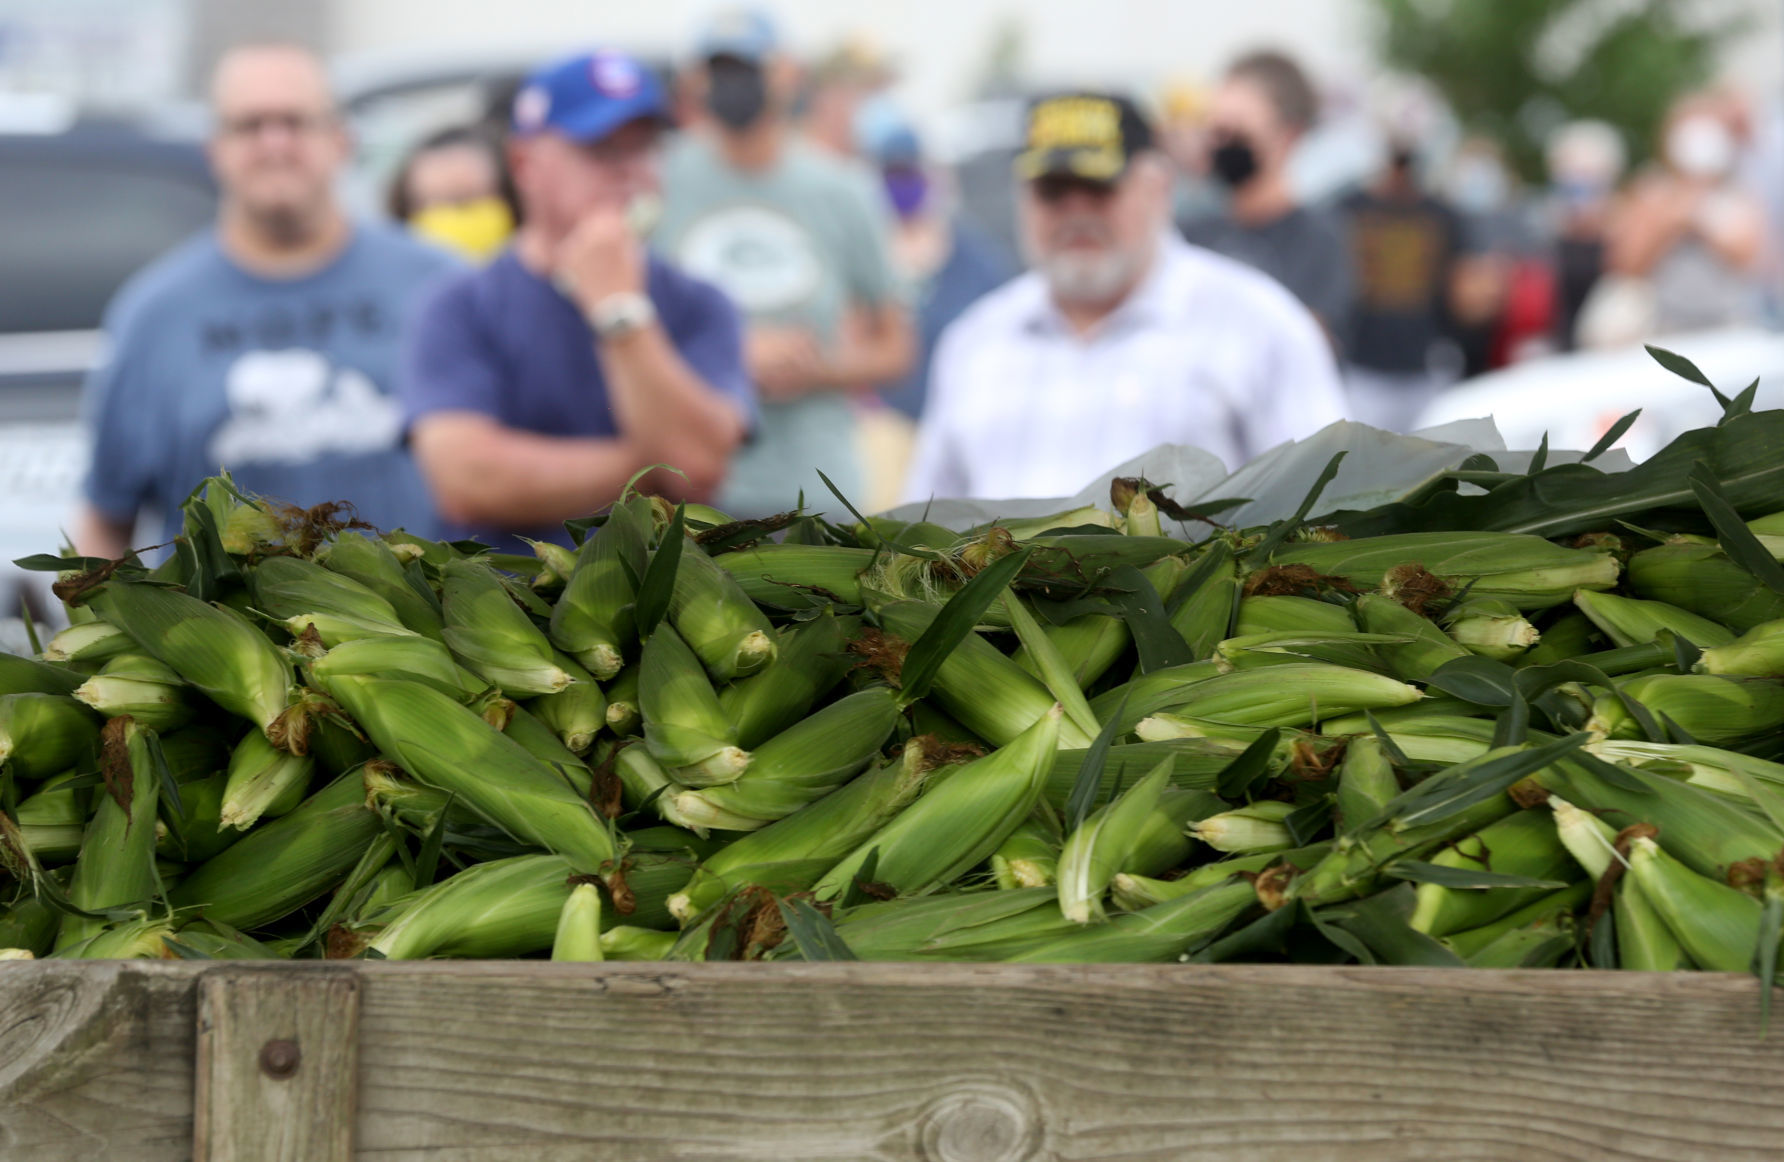 People wait in line for Fincel’s Sweet Corn at Blain’s Farm & Fleet on Saturday. PHOTO CREDIT: JESSICA REILLY